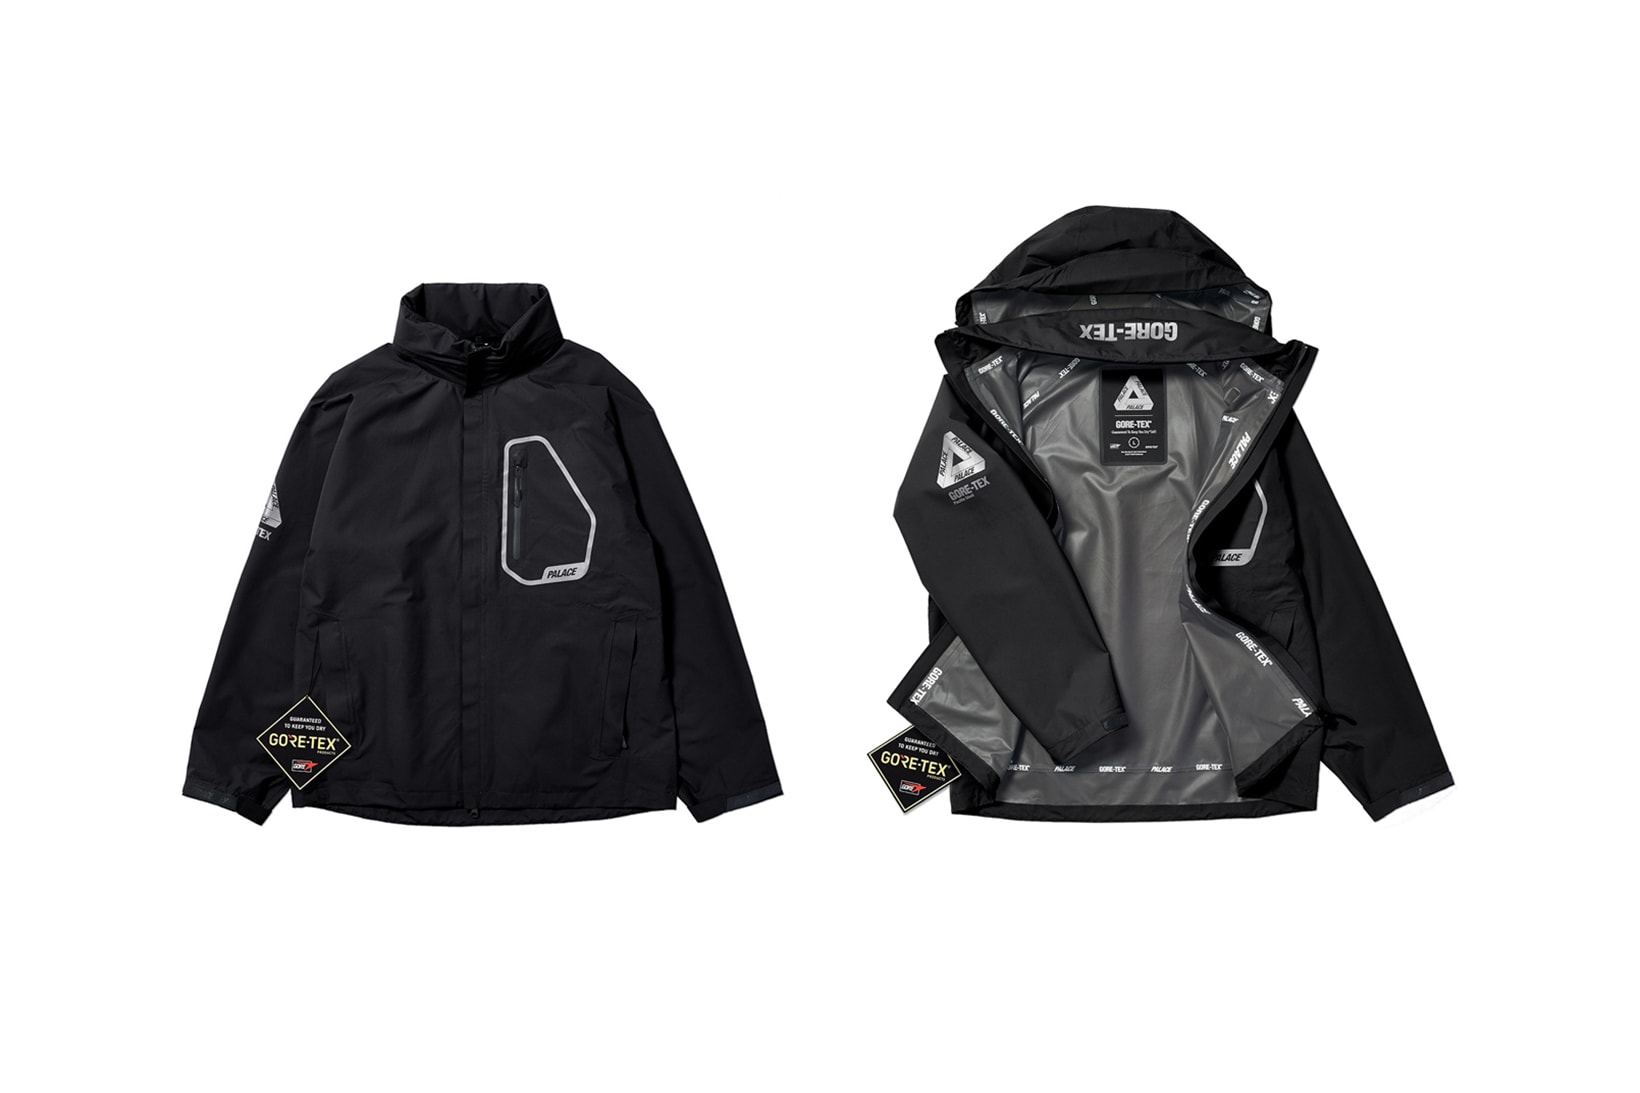 palace spring summer collection drop 4 gore tex jackets pants black outerwear fashion 